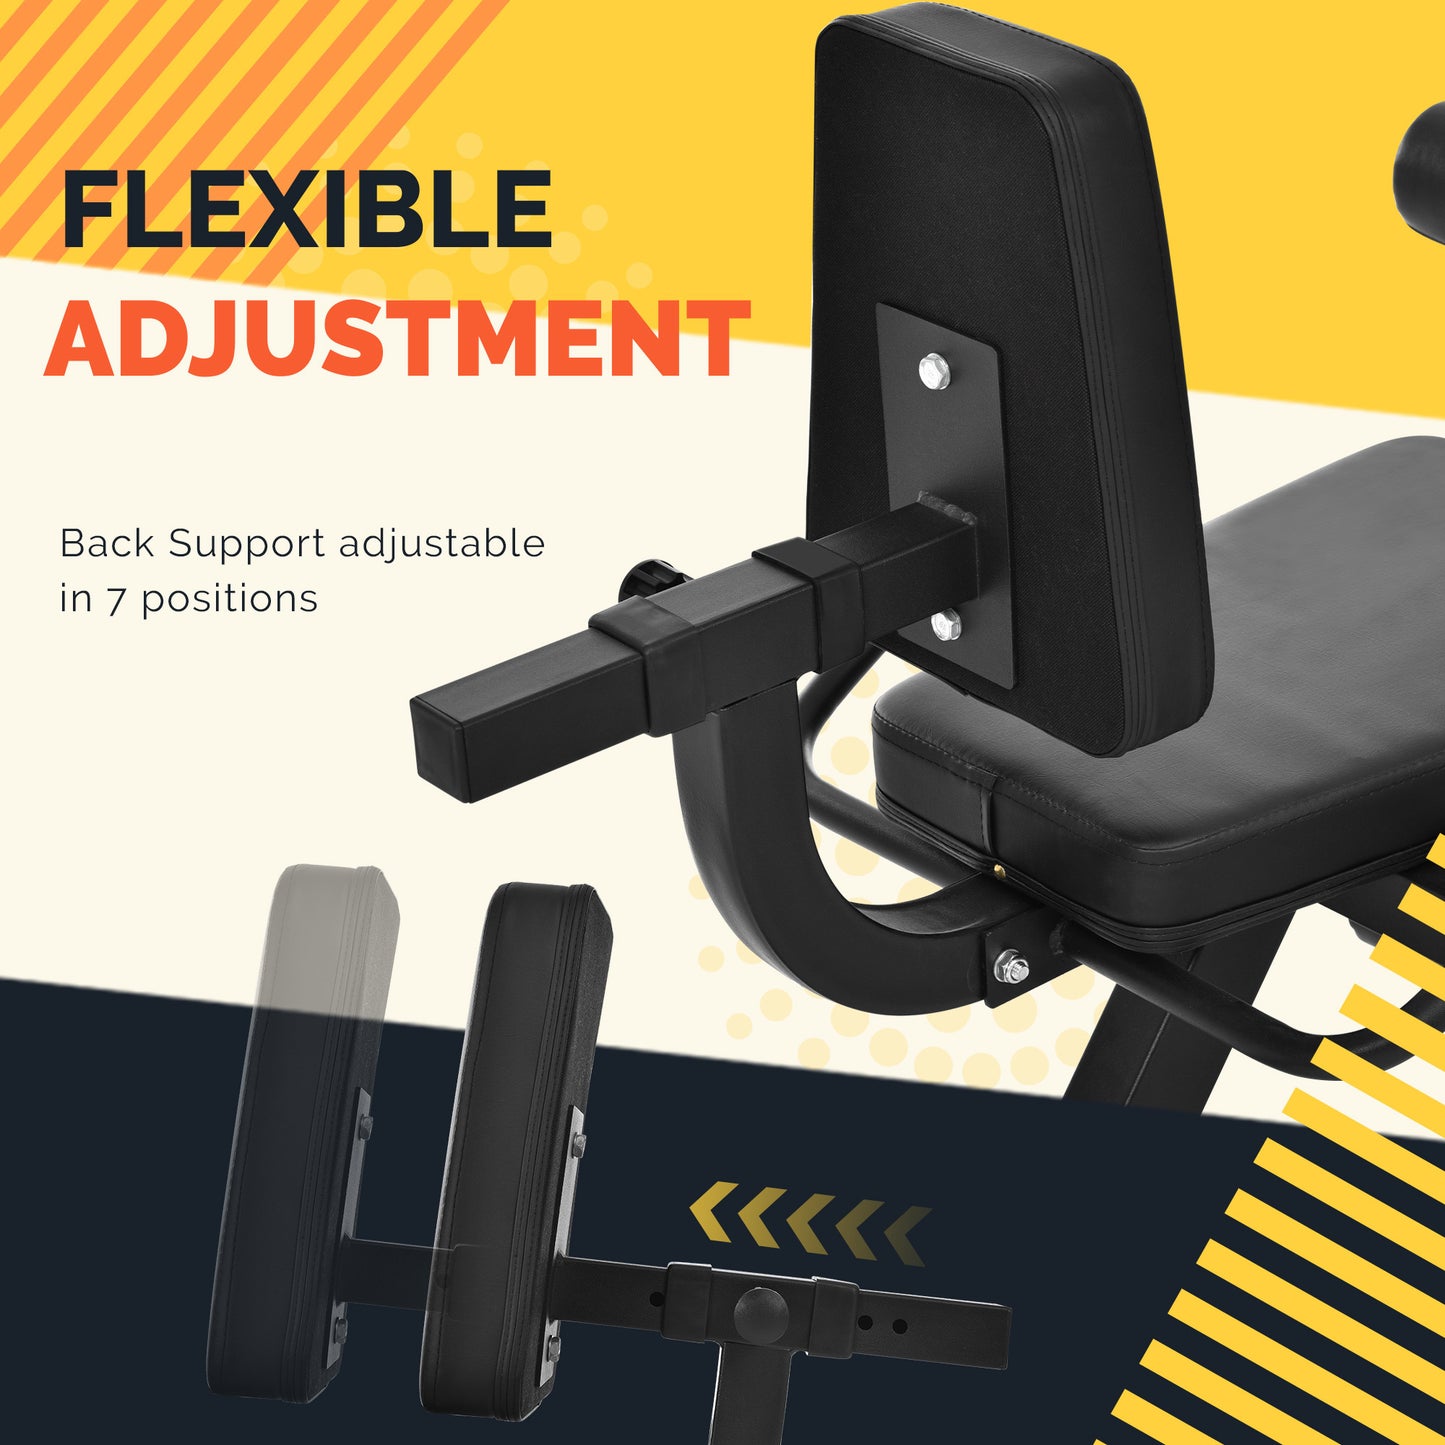 Leg Extension and Curl Machine - Leg Exercise Machine with Adjustable Seat Backrest and Rotary Leg Extenstion, Adjustable Leg Curl for Home Gym Hamstring Workout and Quadriceps Exercises